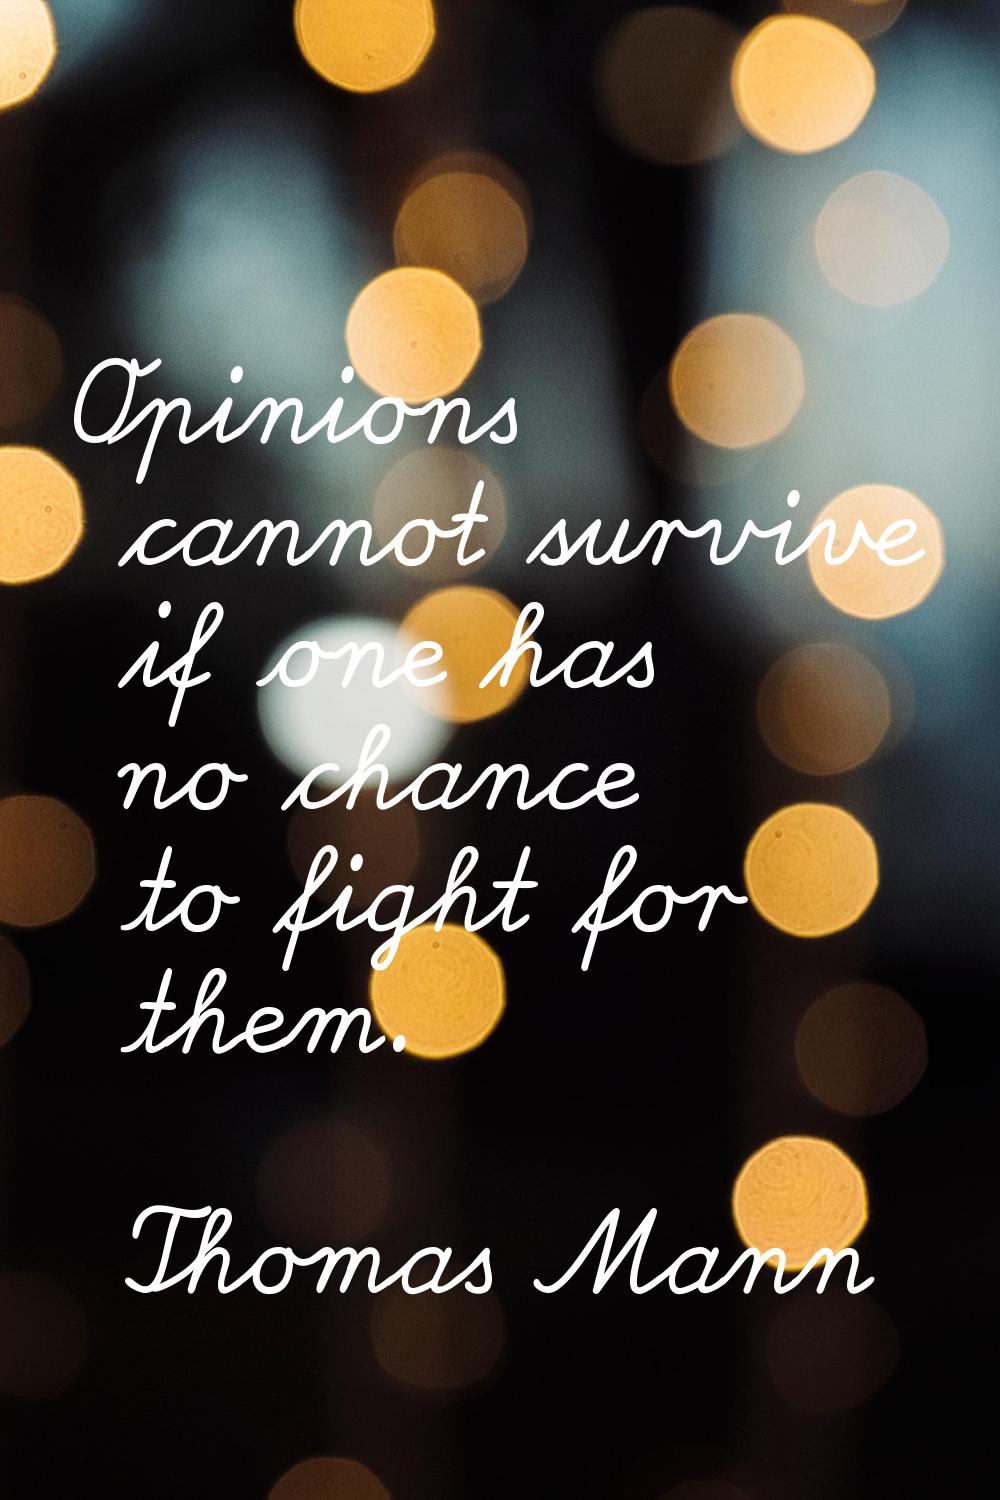 Opinions cannot survive if one has no chance to fight for them.